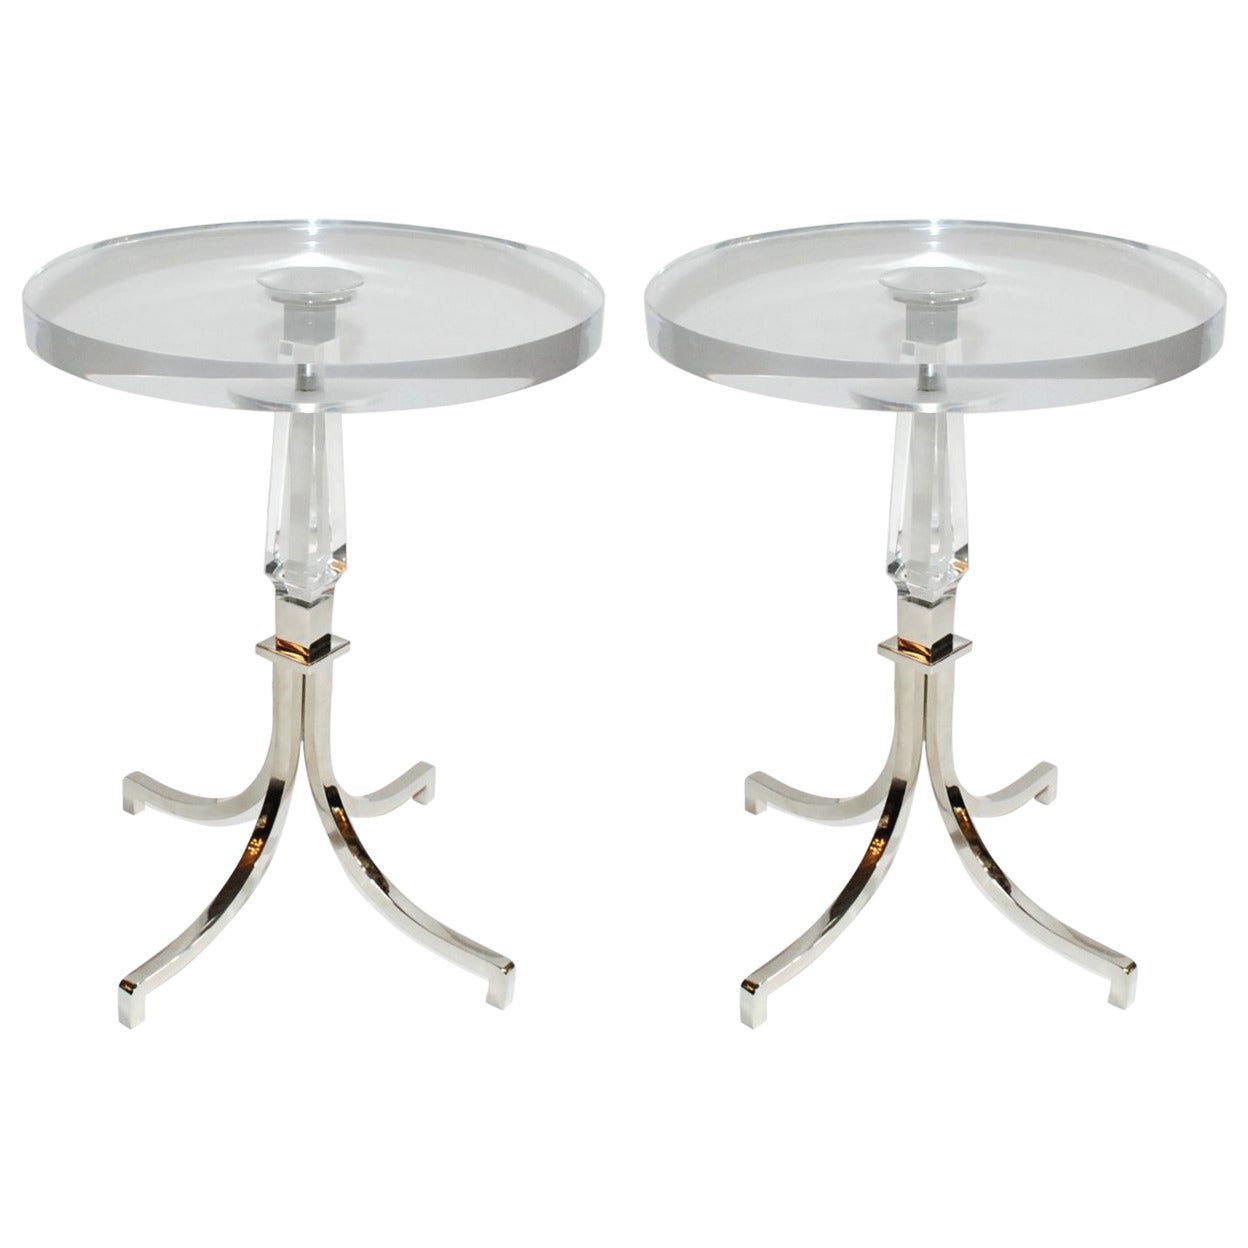 Pair of Regency Style Lucite Side Tables Signed  by Charles Hollis Jones